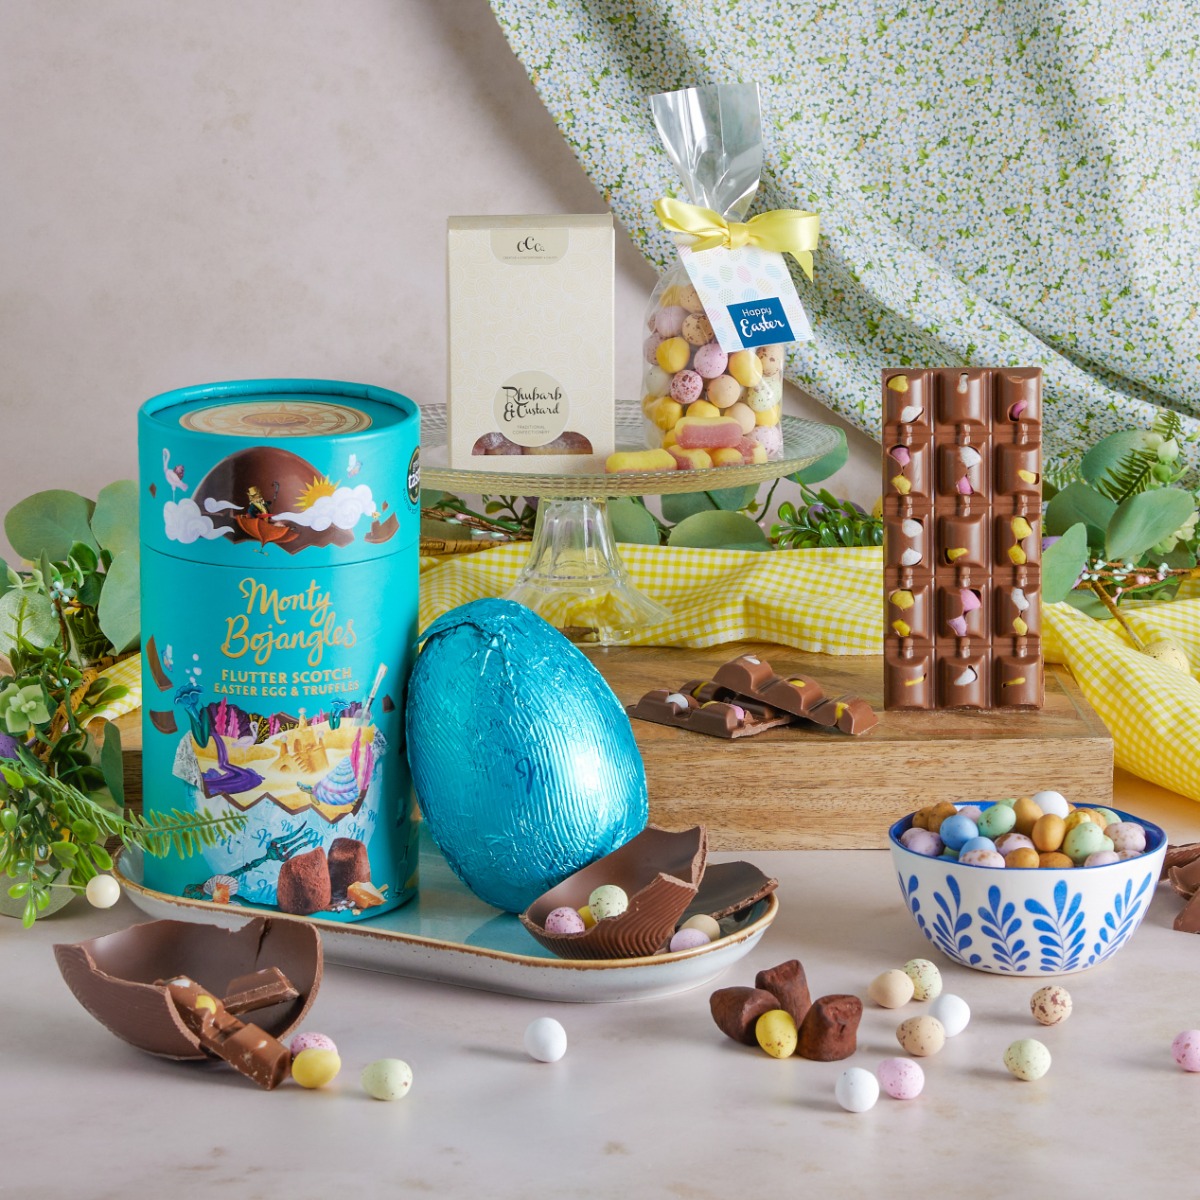 Easter Egg Gift Box with chocolate treats and contents on display